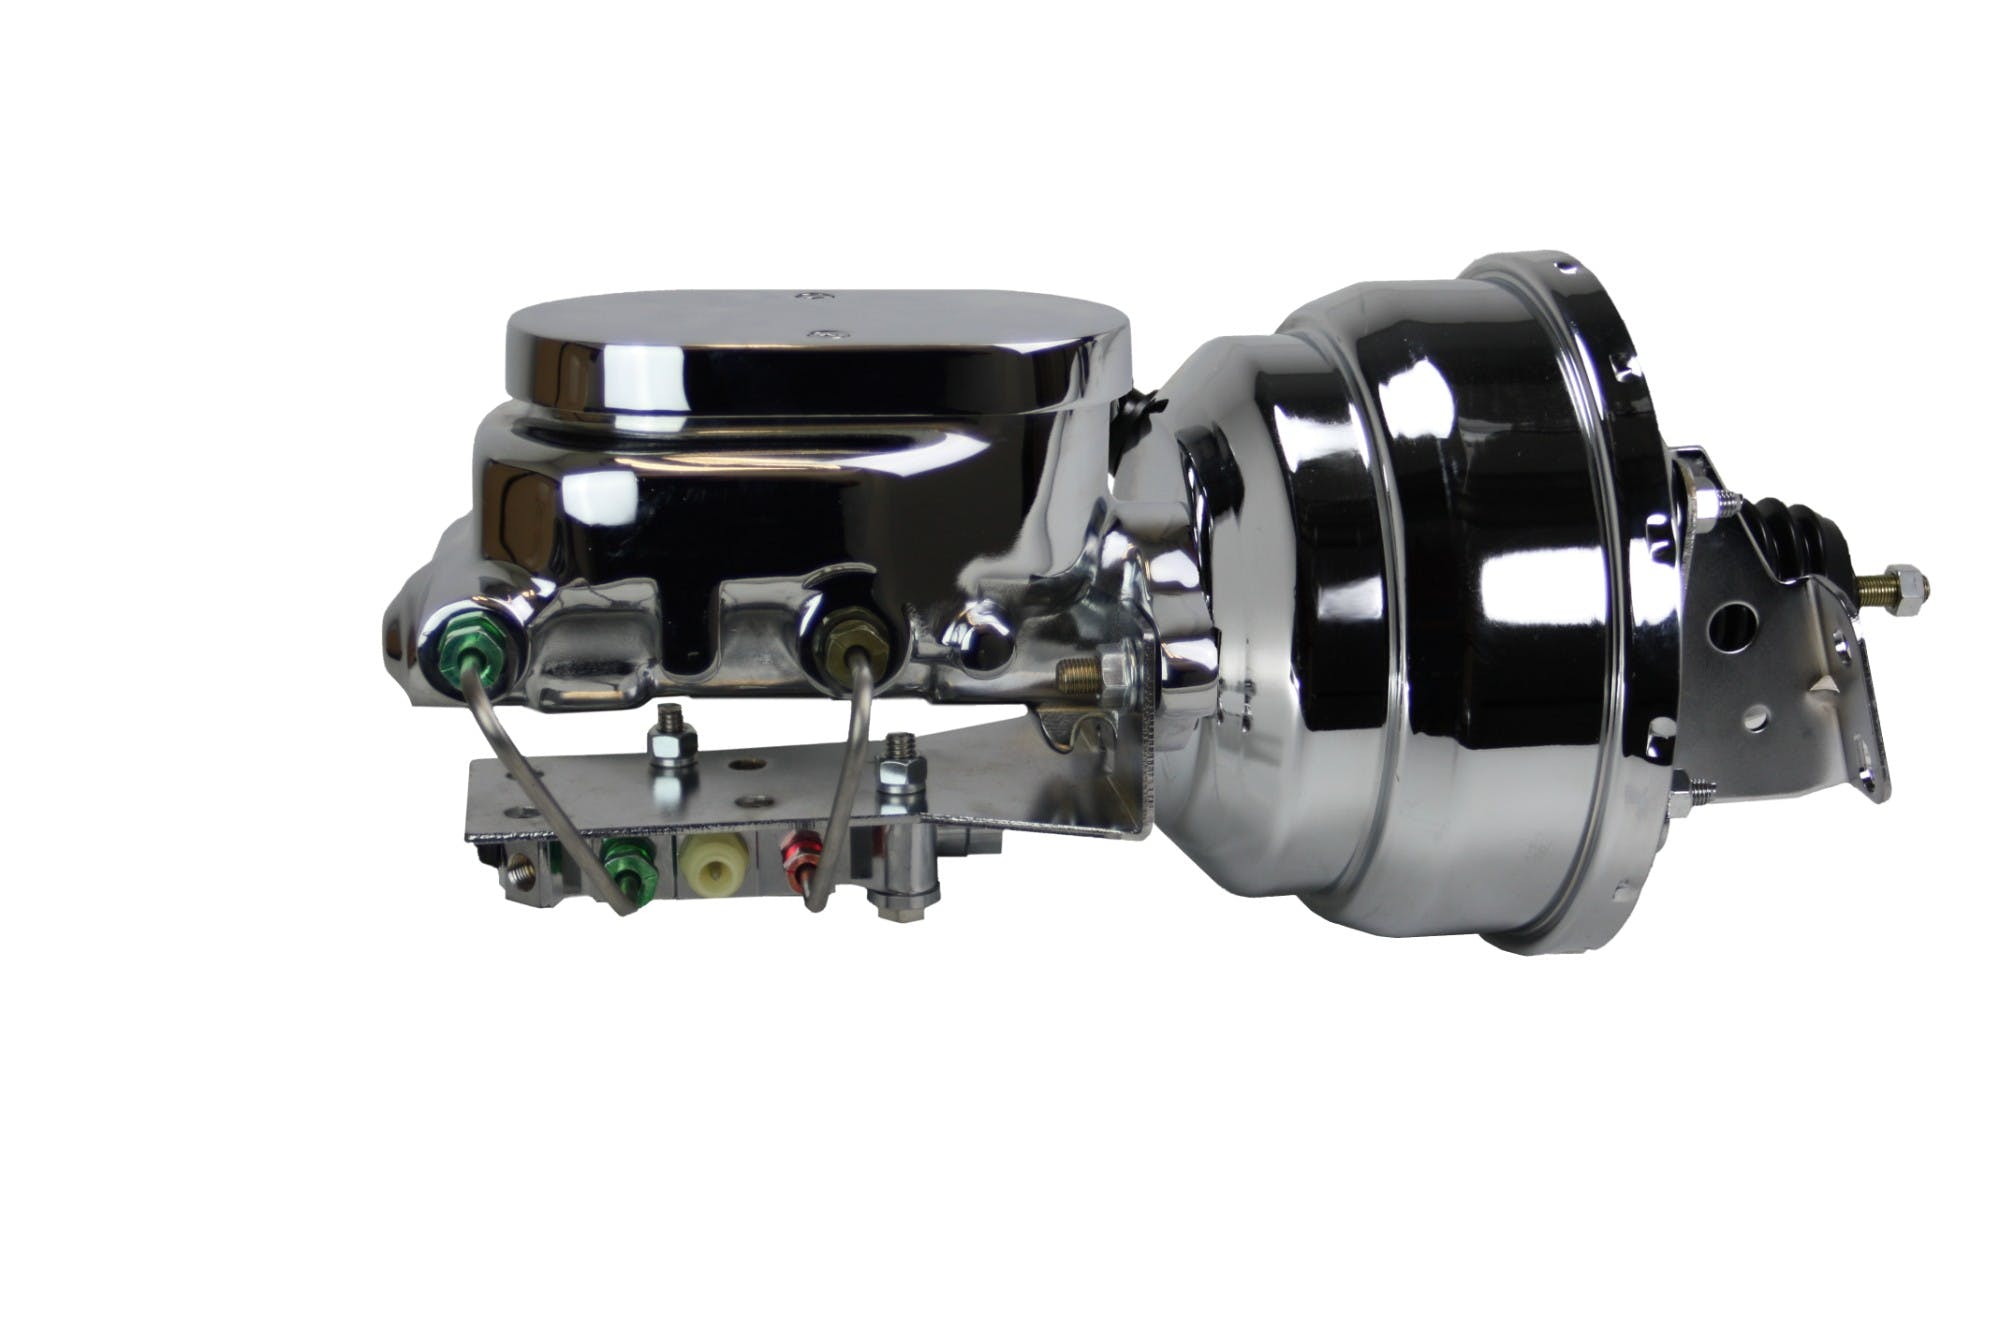 LEED Brakes PBKT1045 8 inch Dual Chrome Booster